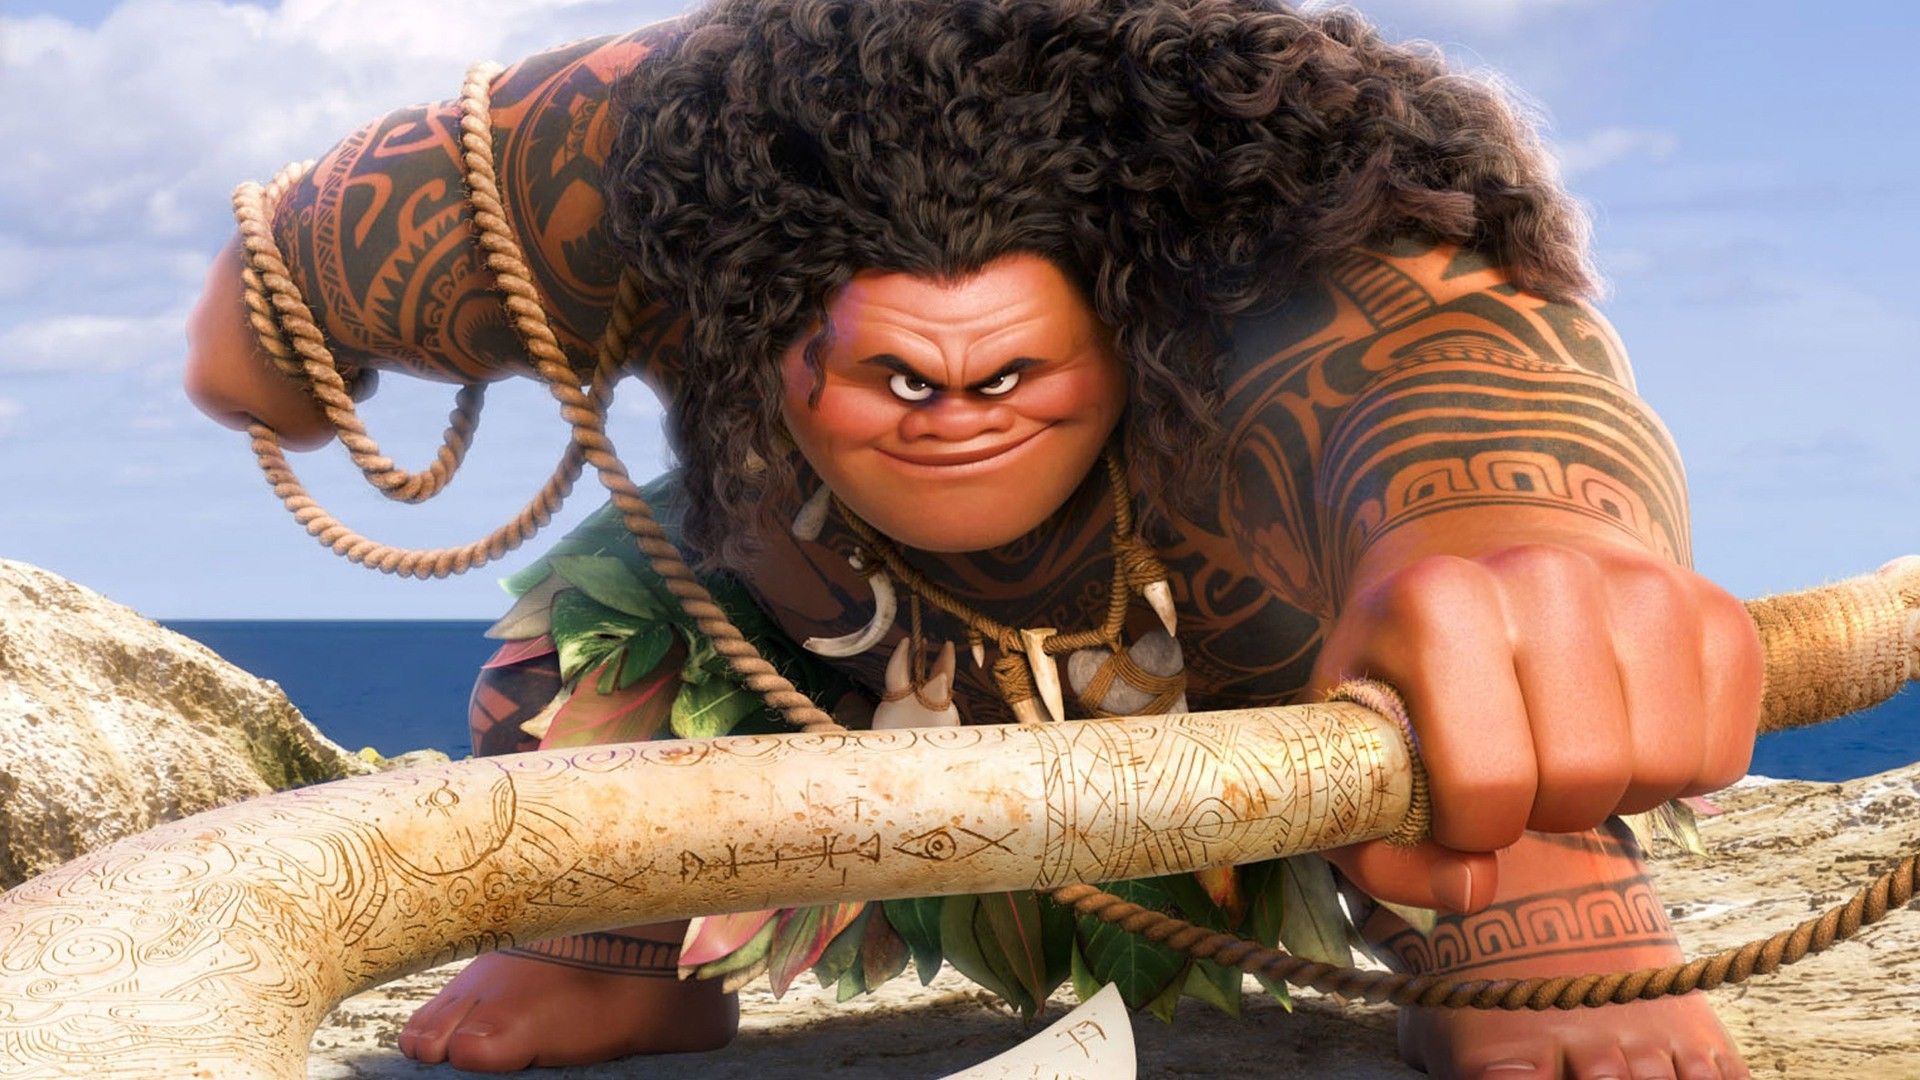 Latest Movie Moana 2016 Wallpaper Background Data Demigod Of The Wind And Sea HD Wallpaper